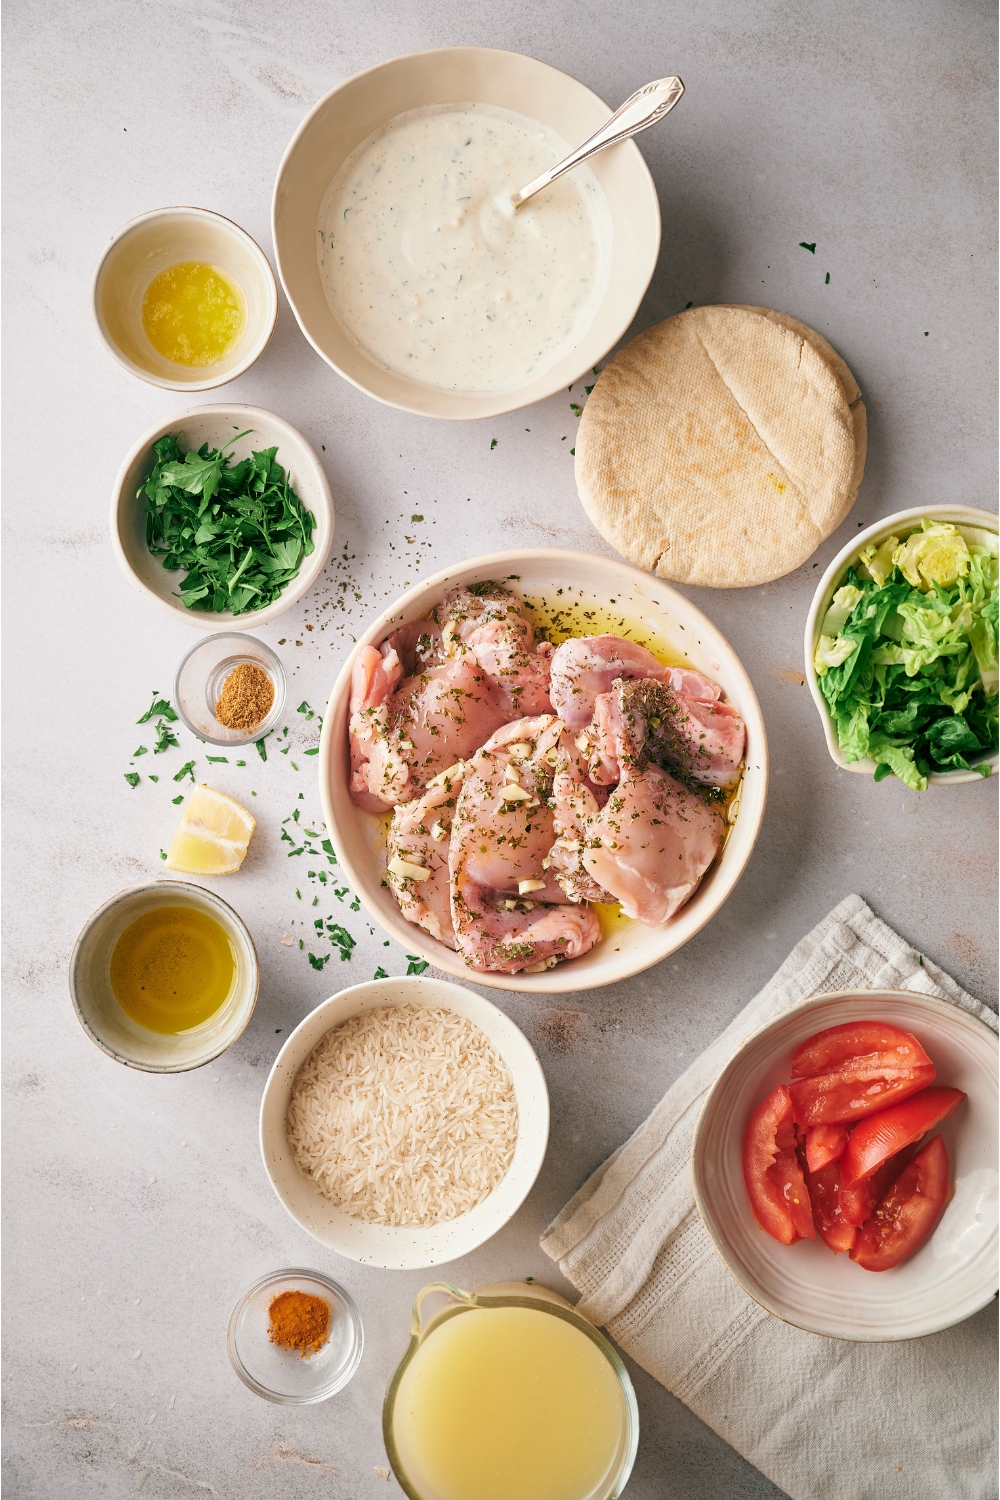 An assortment of ingredients for halal chicken over rice including bowls of raw marinating chicken, white sauce, tomatoes, uncooked rice, broth, parsley, and pita bread.